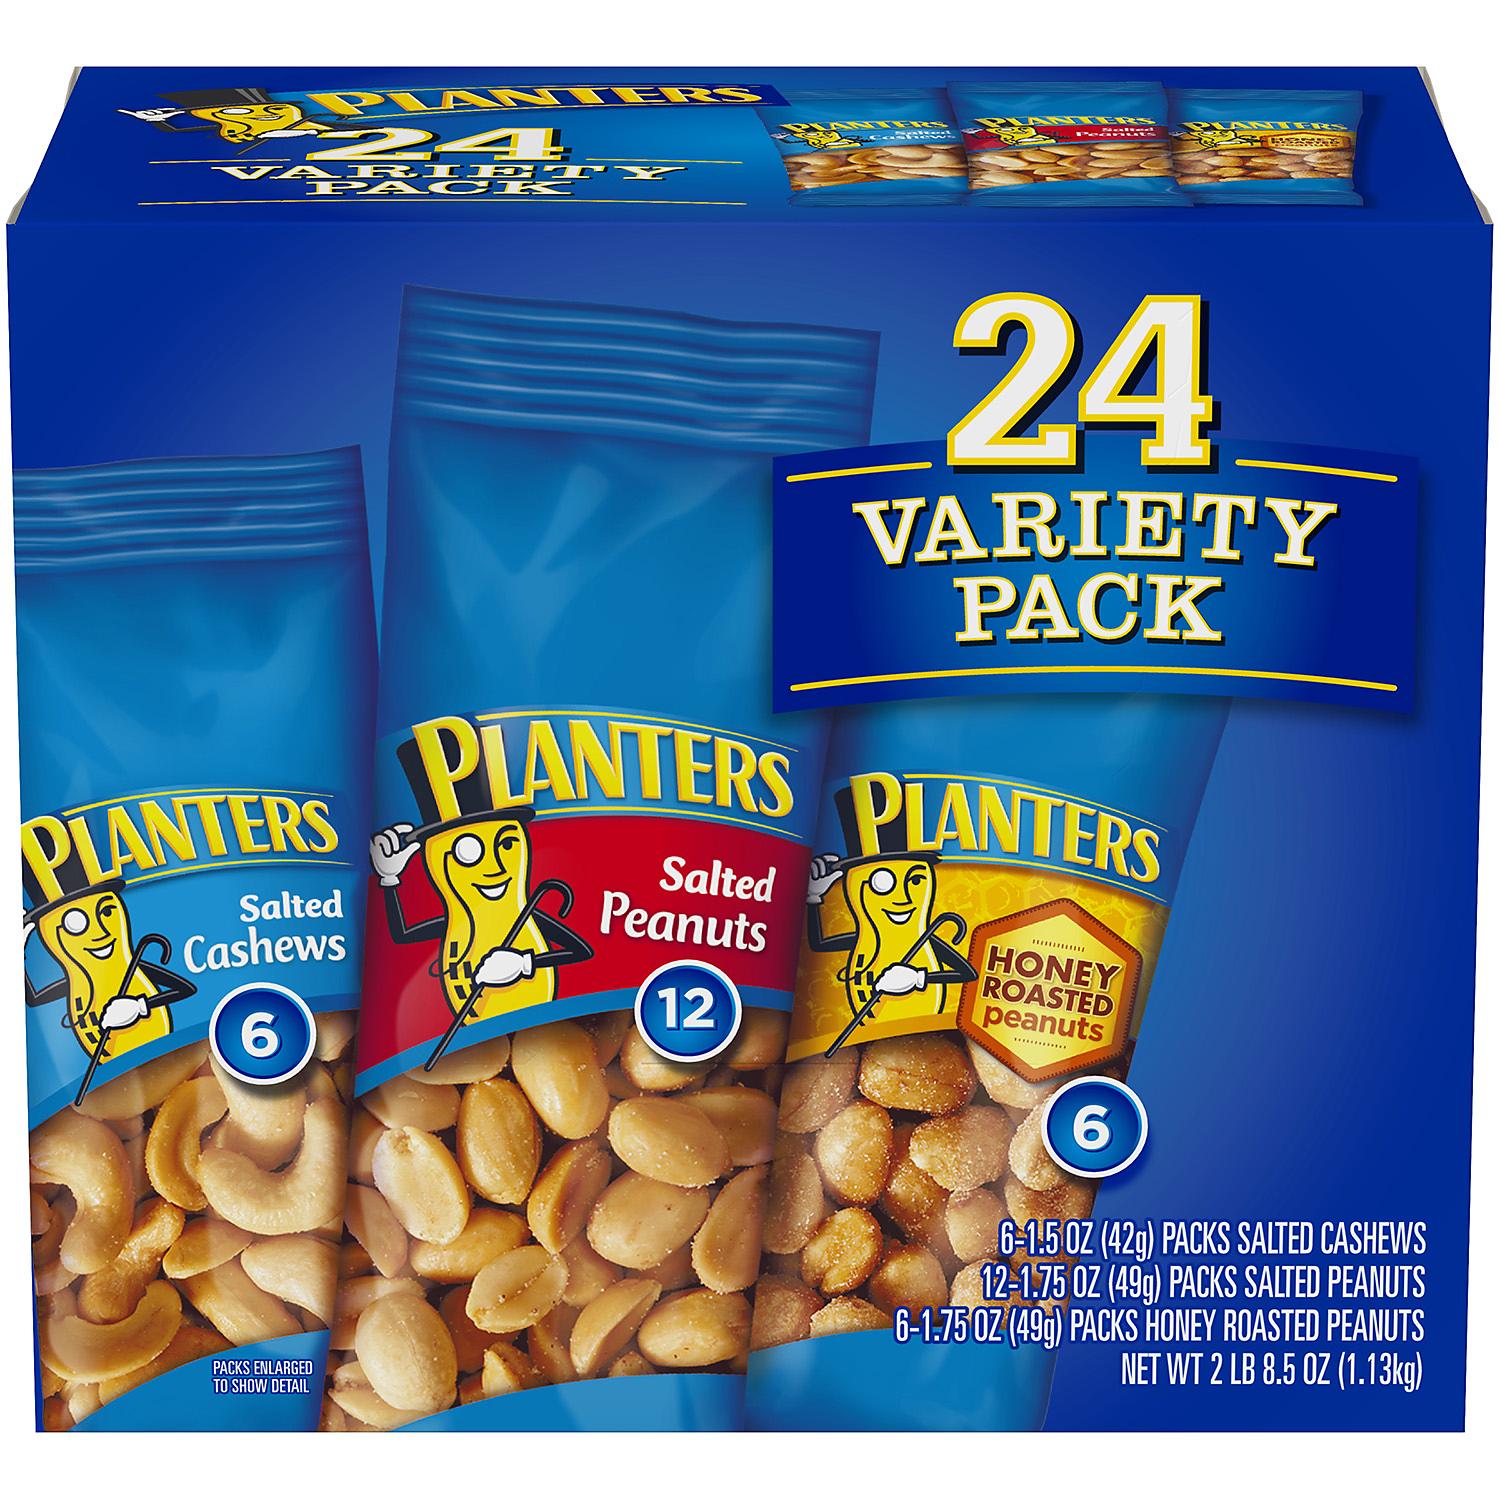 Planters Nuts Cashews and Peanuts Variety Pack, 24 Ct